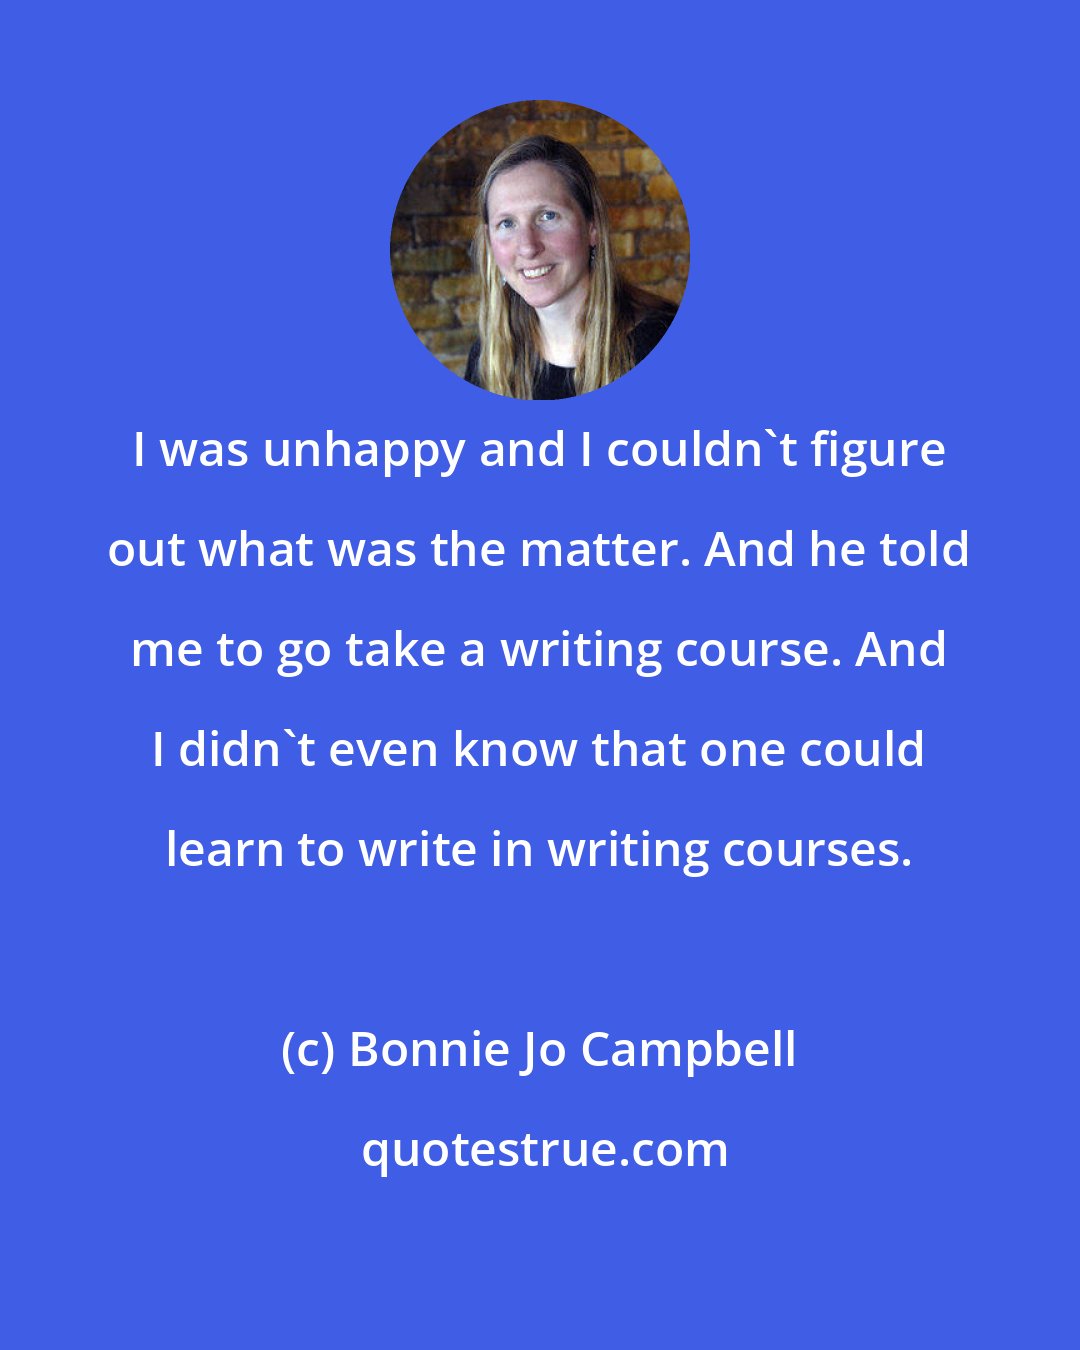 Bonnie Jo Campbell: I was unhappy and I couldn't figure out what was the matter. And he told me to go take a writing course. And I didn't even know that one could learn to write in writing courses.